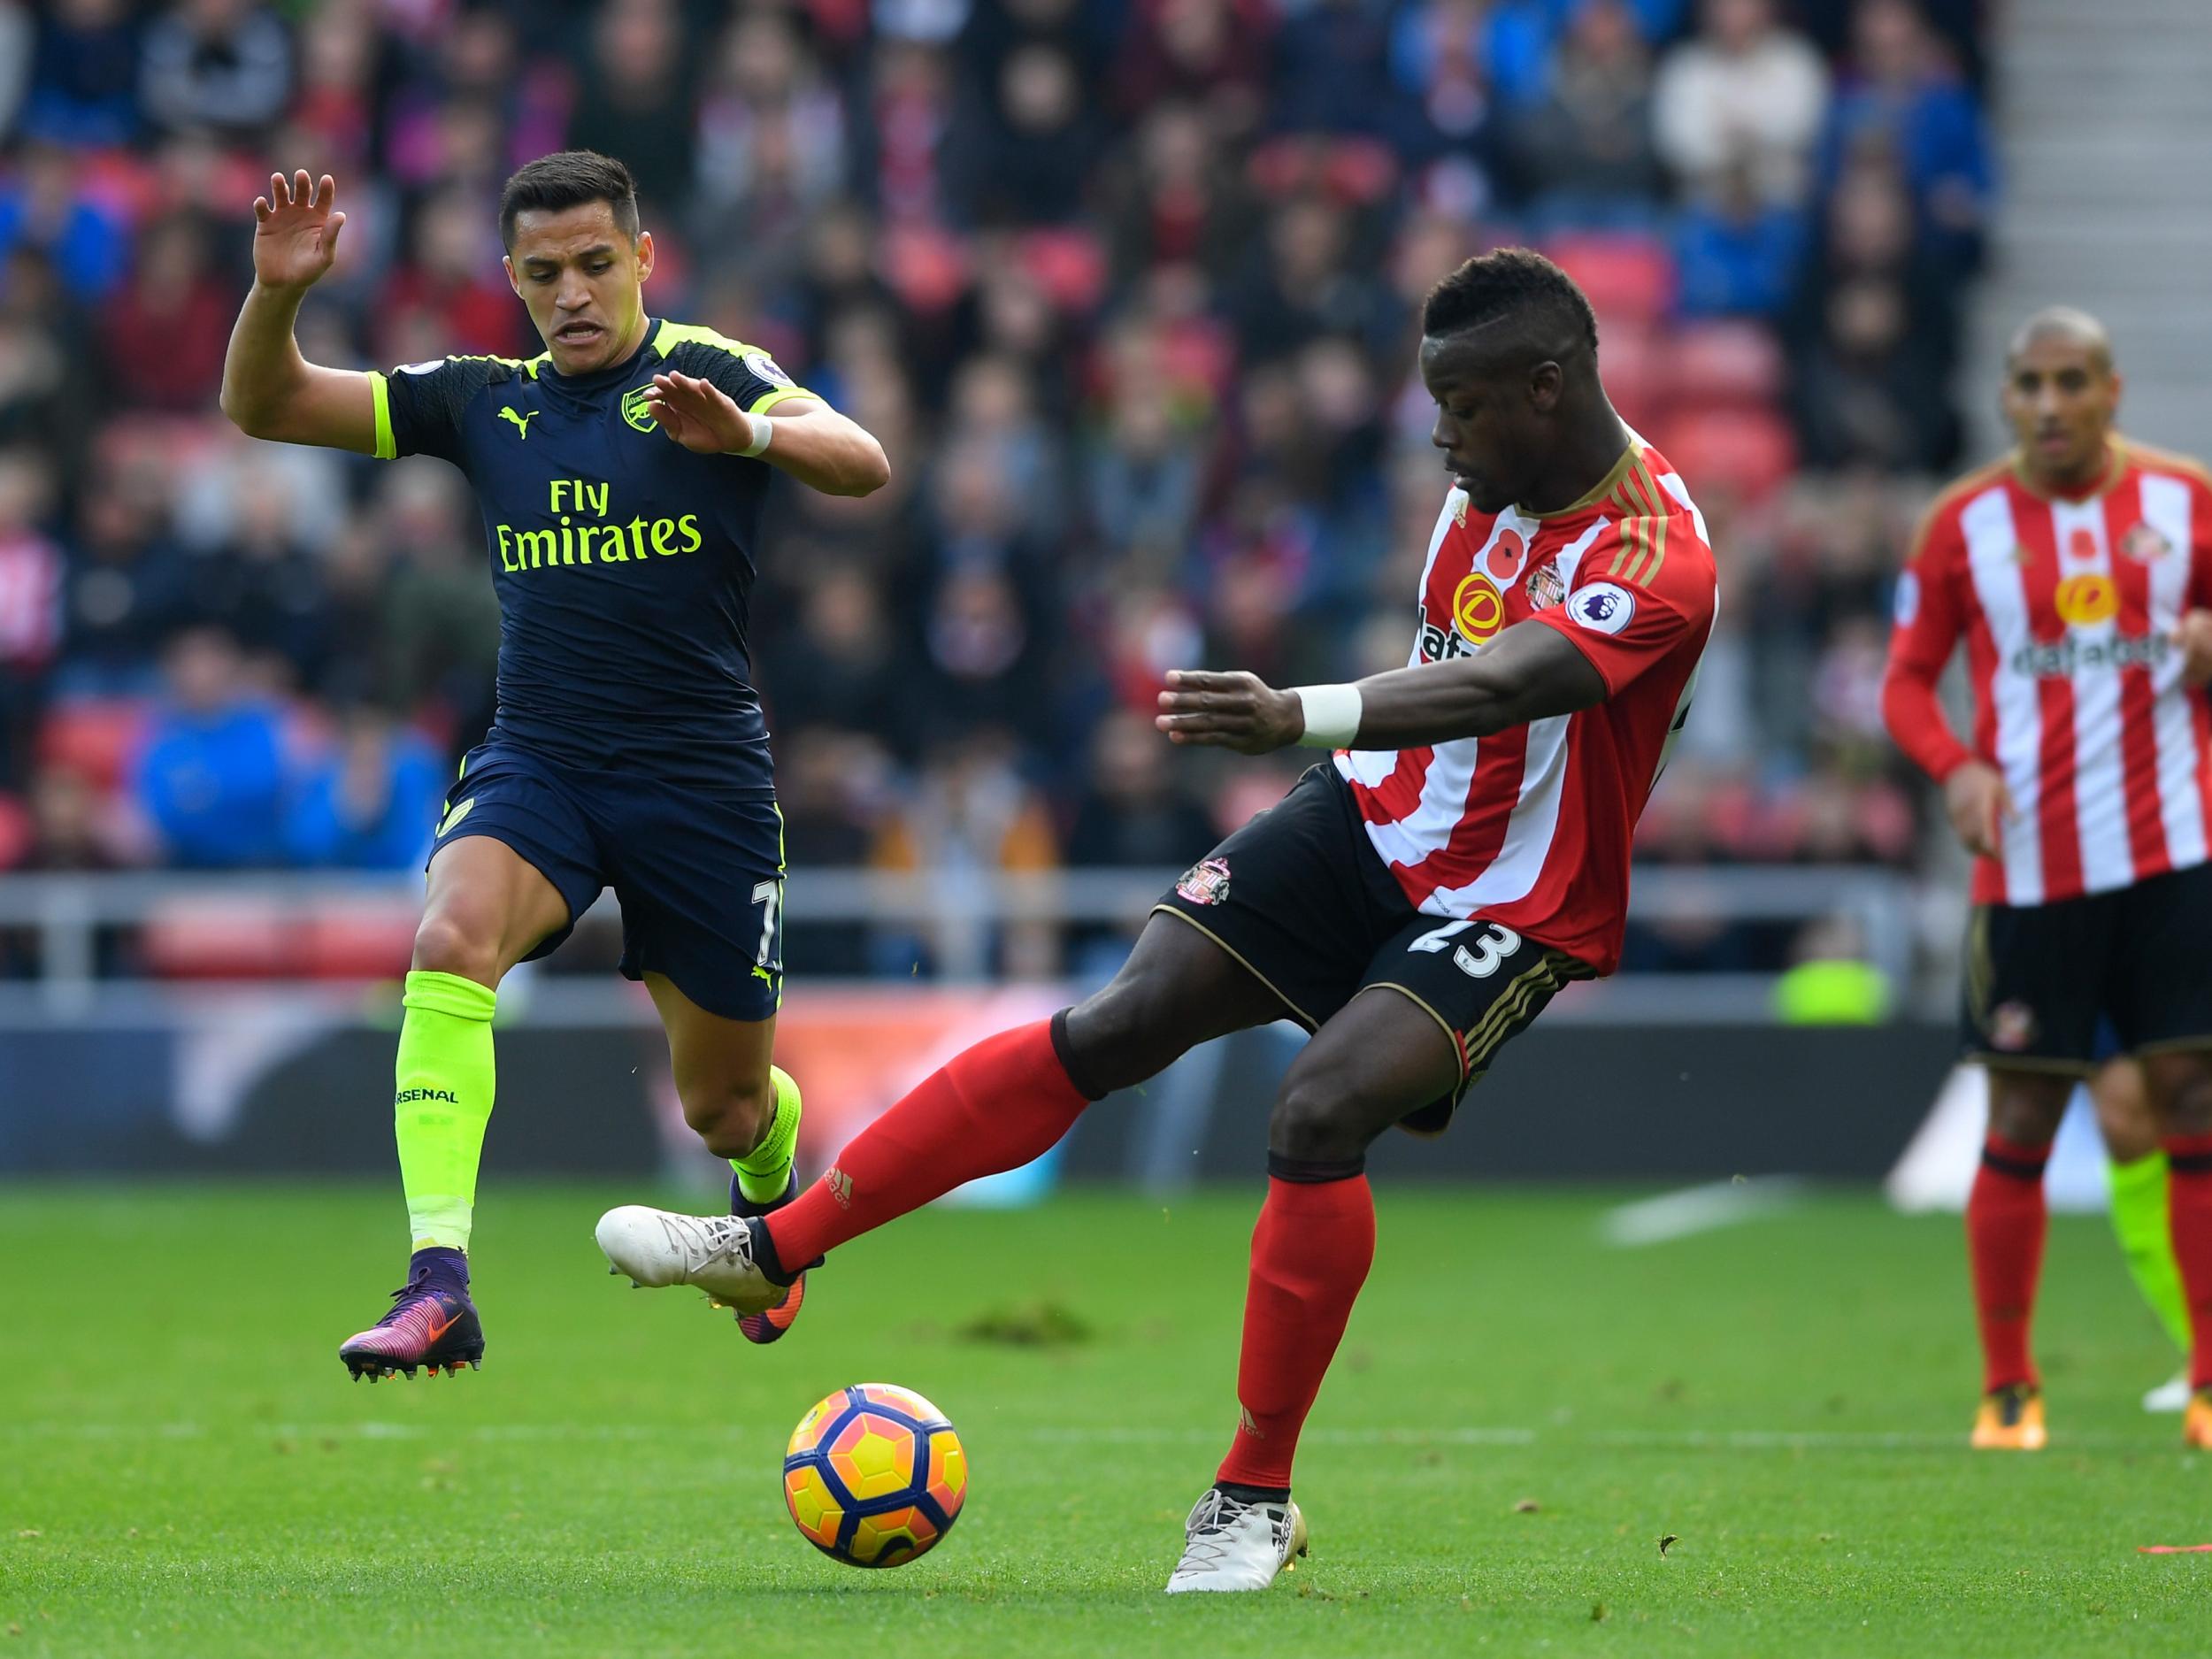 &#13;
Lamine Kone's arrival in January was key to Sunderland's survival last year &#13;